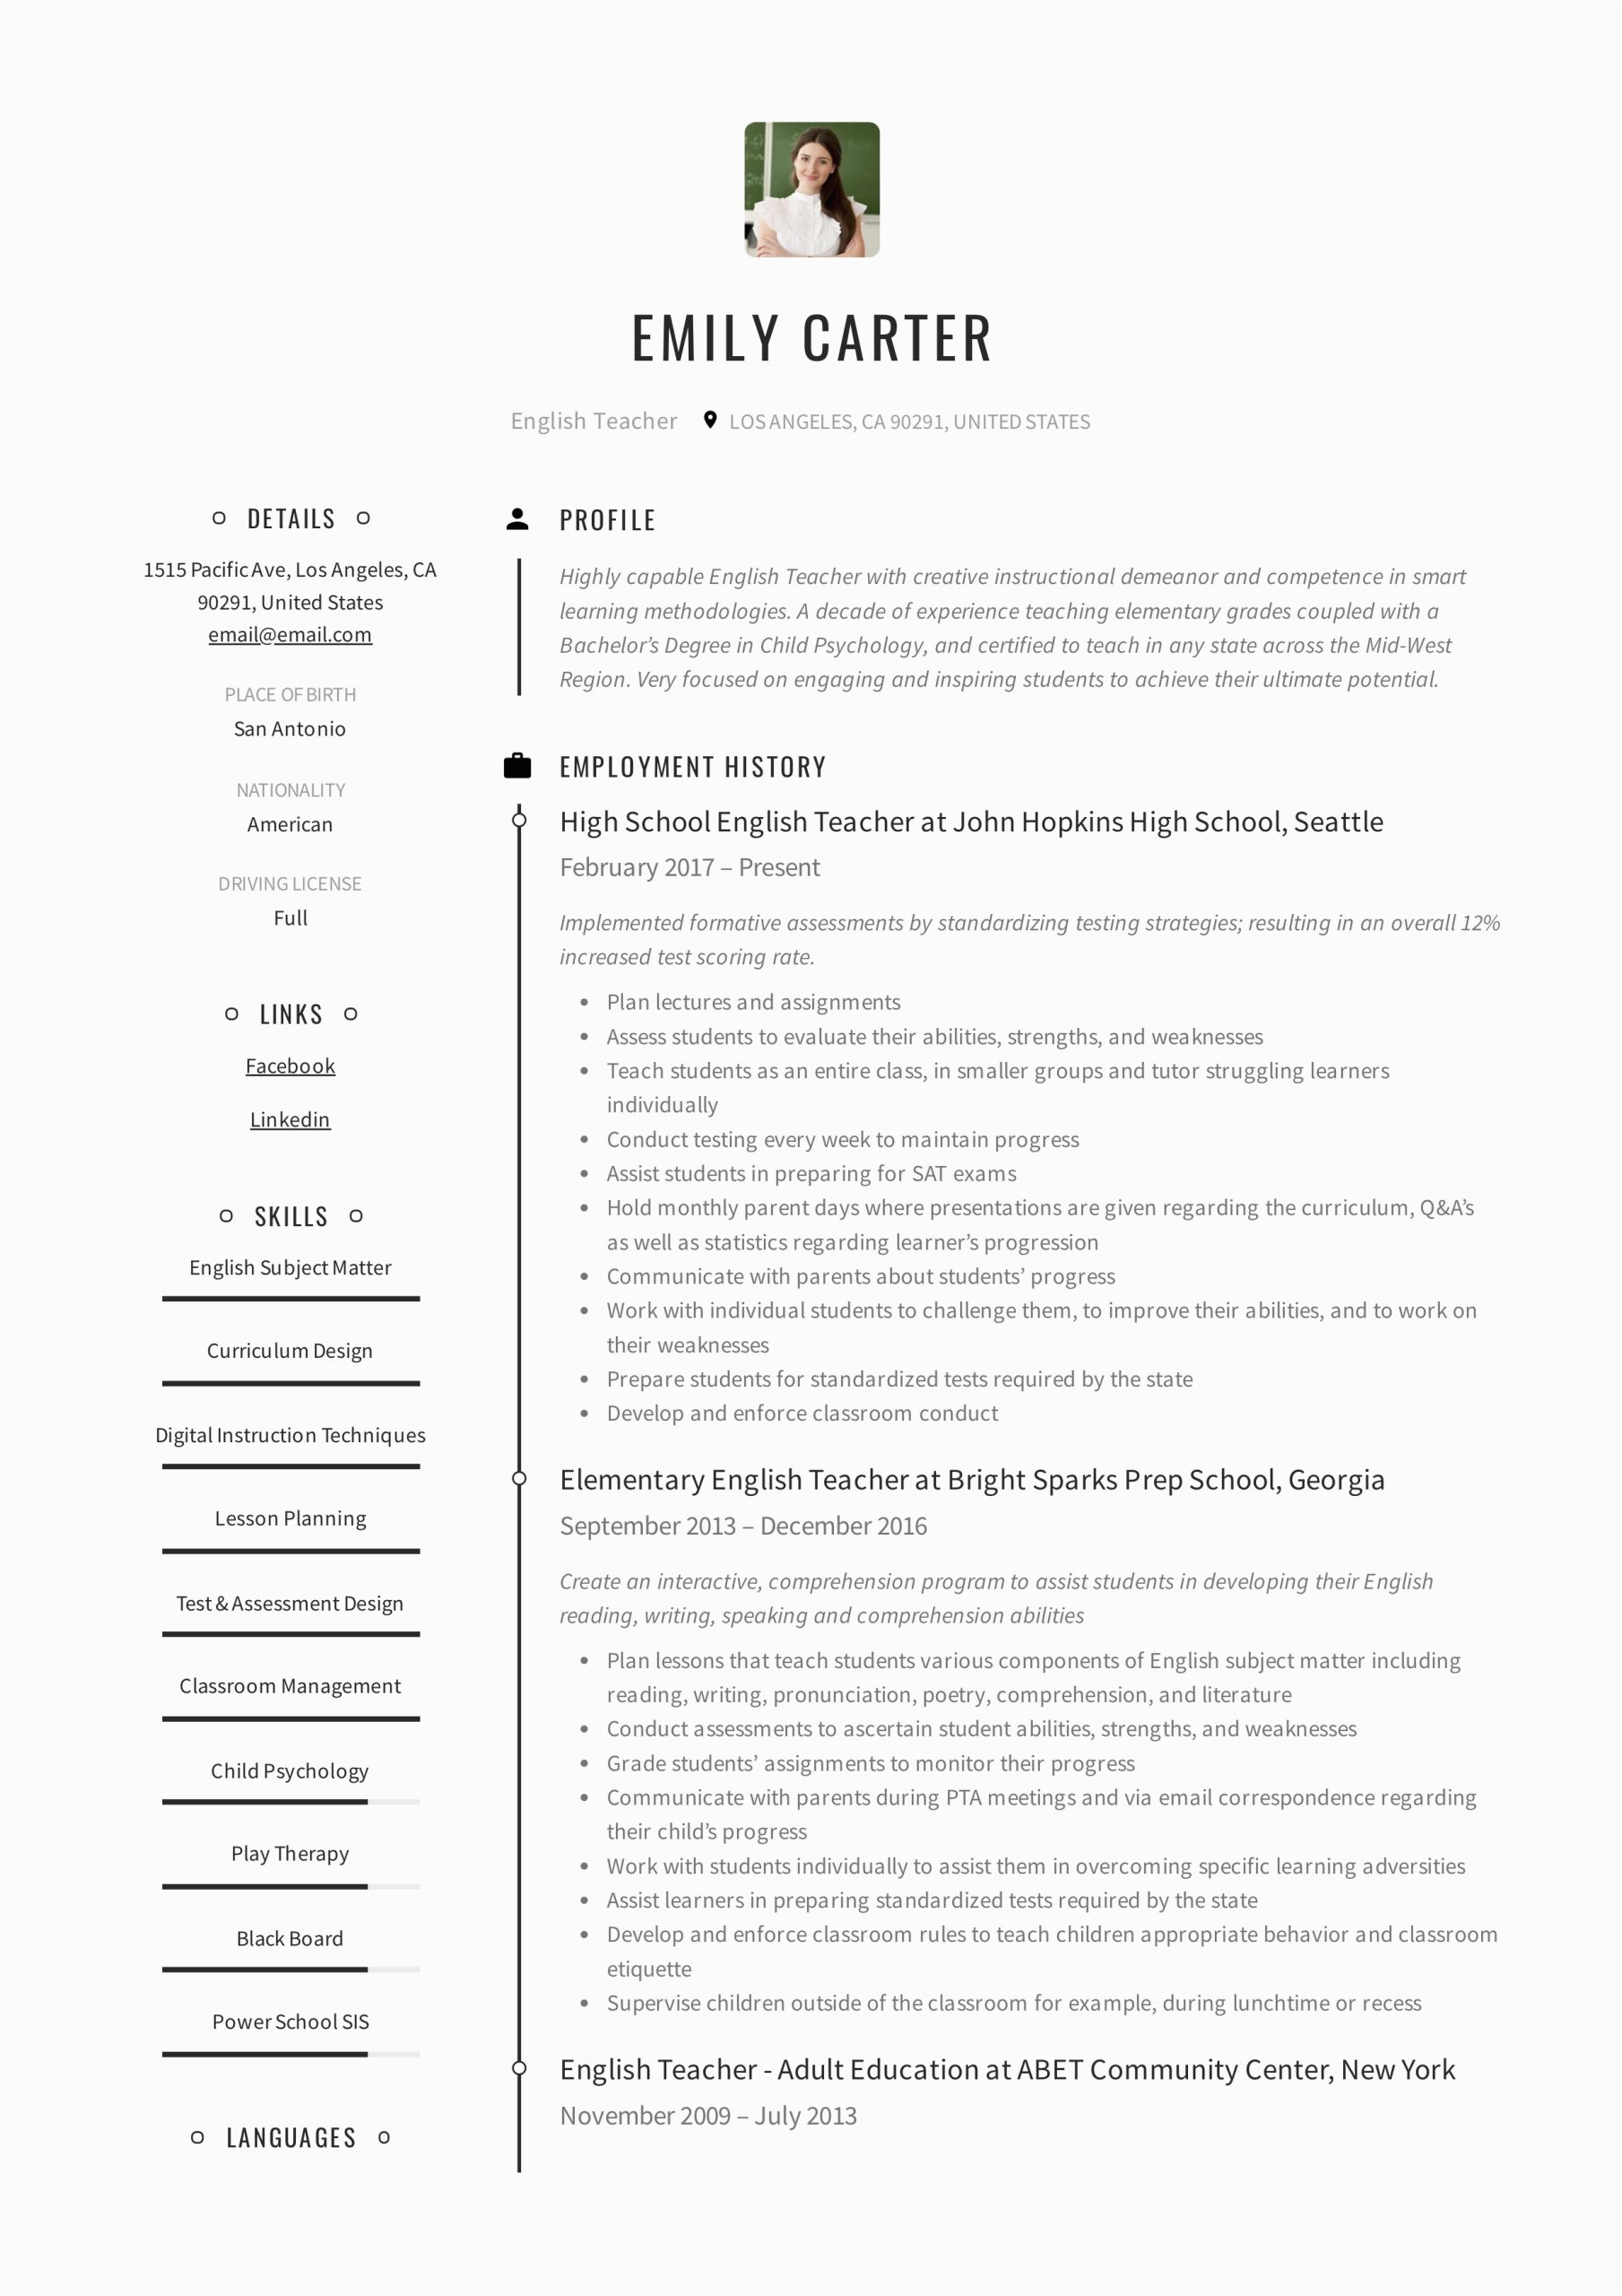 Sample Resume for English Teacher with Experience English Teacher Resume Sample & Writing Guide